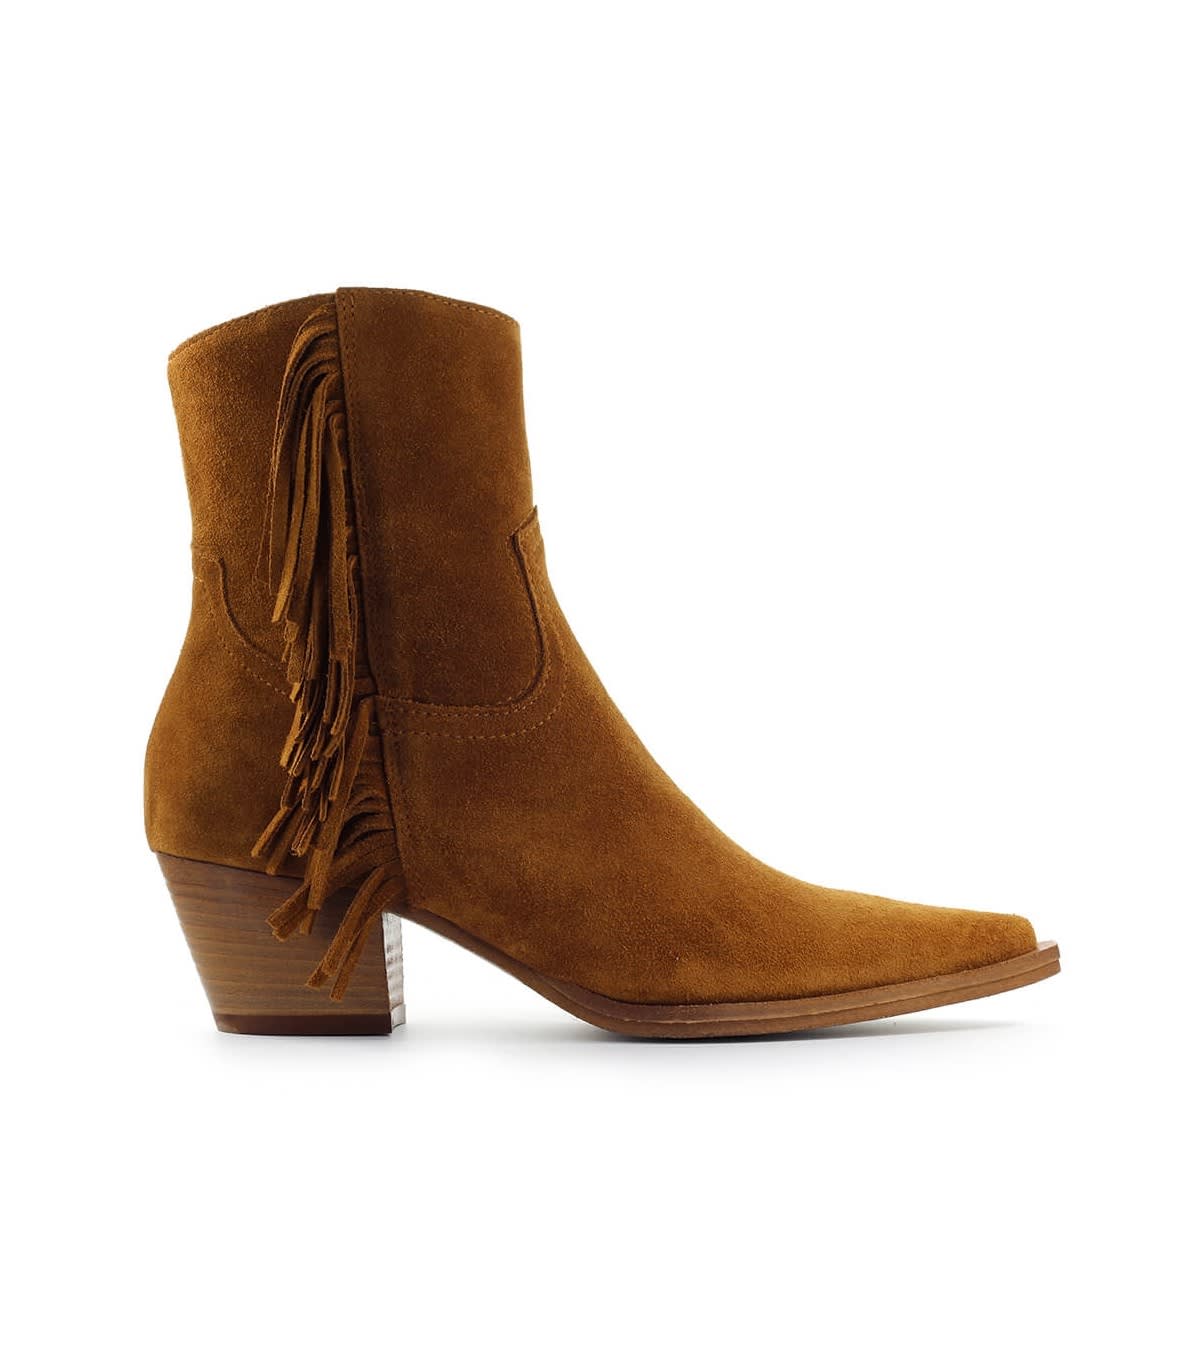 PINKO ZENZERO BROWN ANKLE BOOT WITH FRINGES,11230650